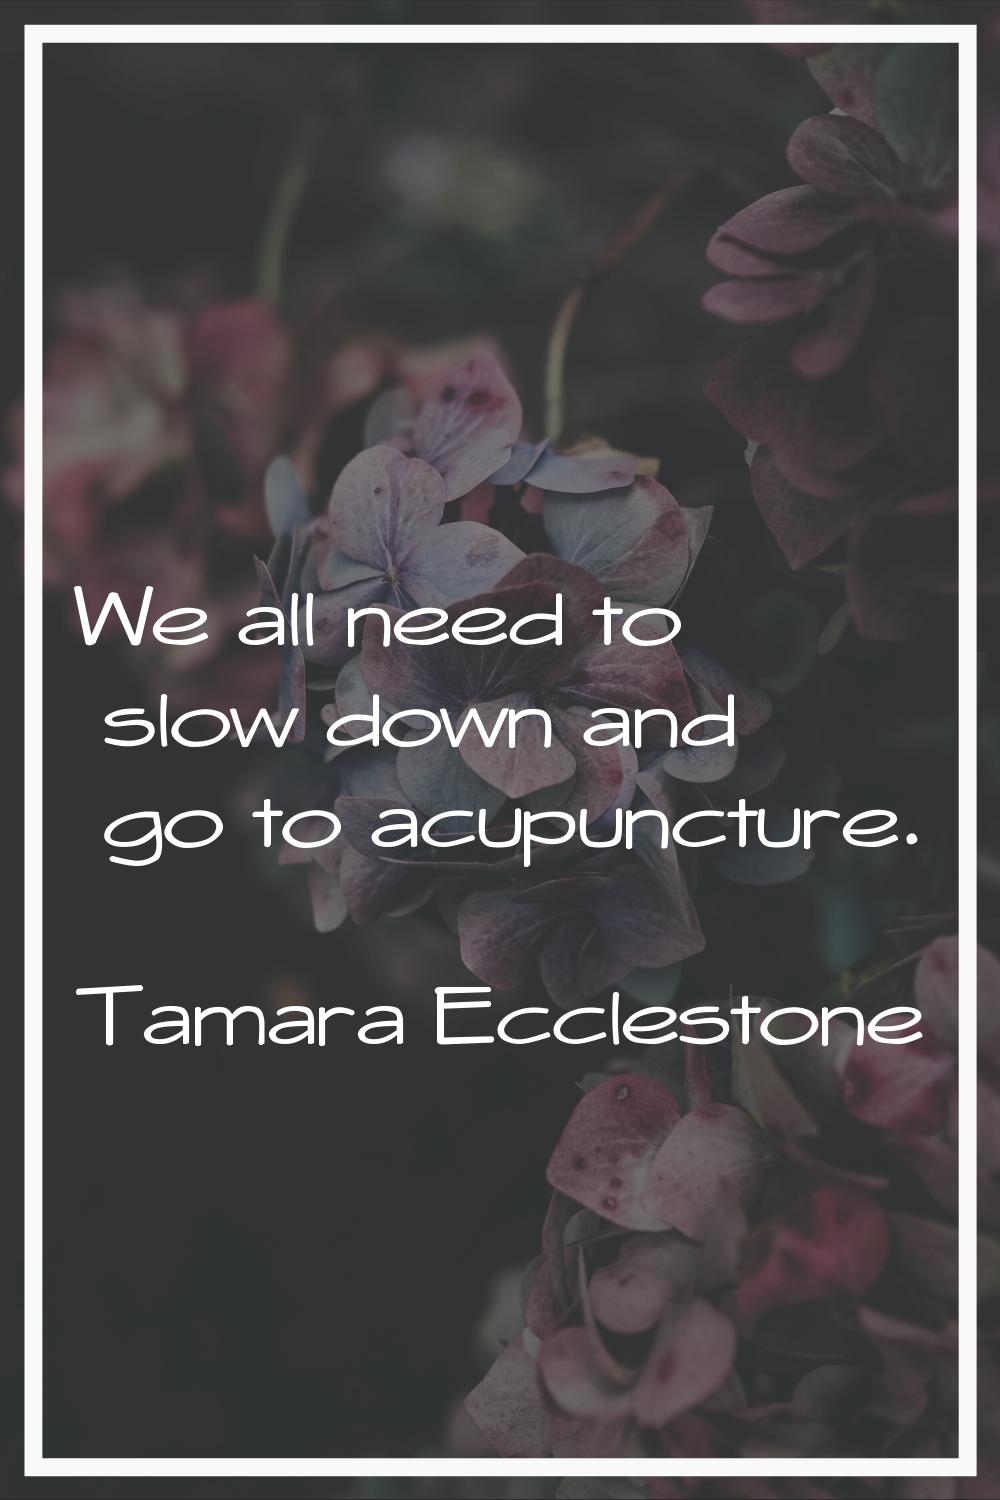 We all need to slow down and go to acupuncture.